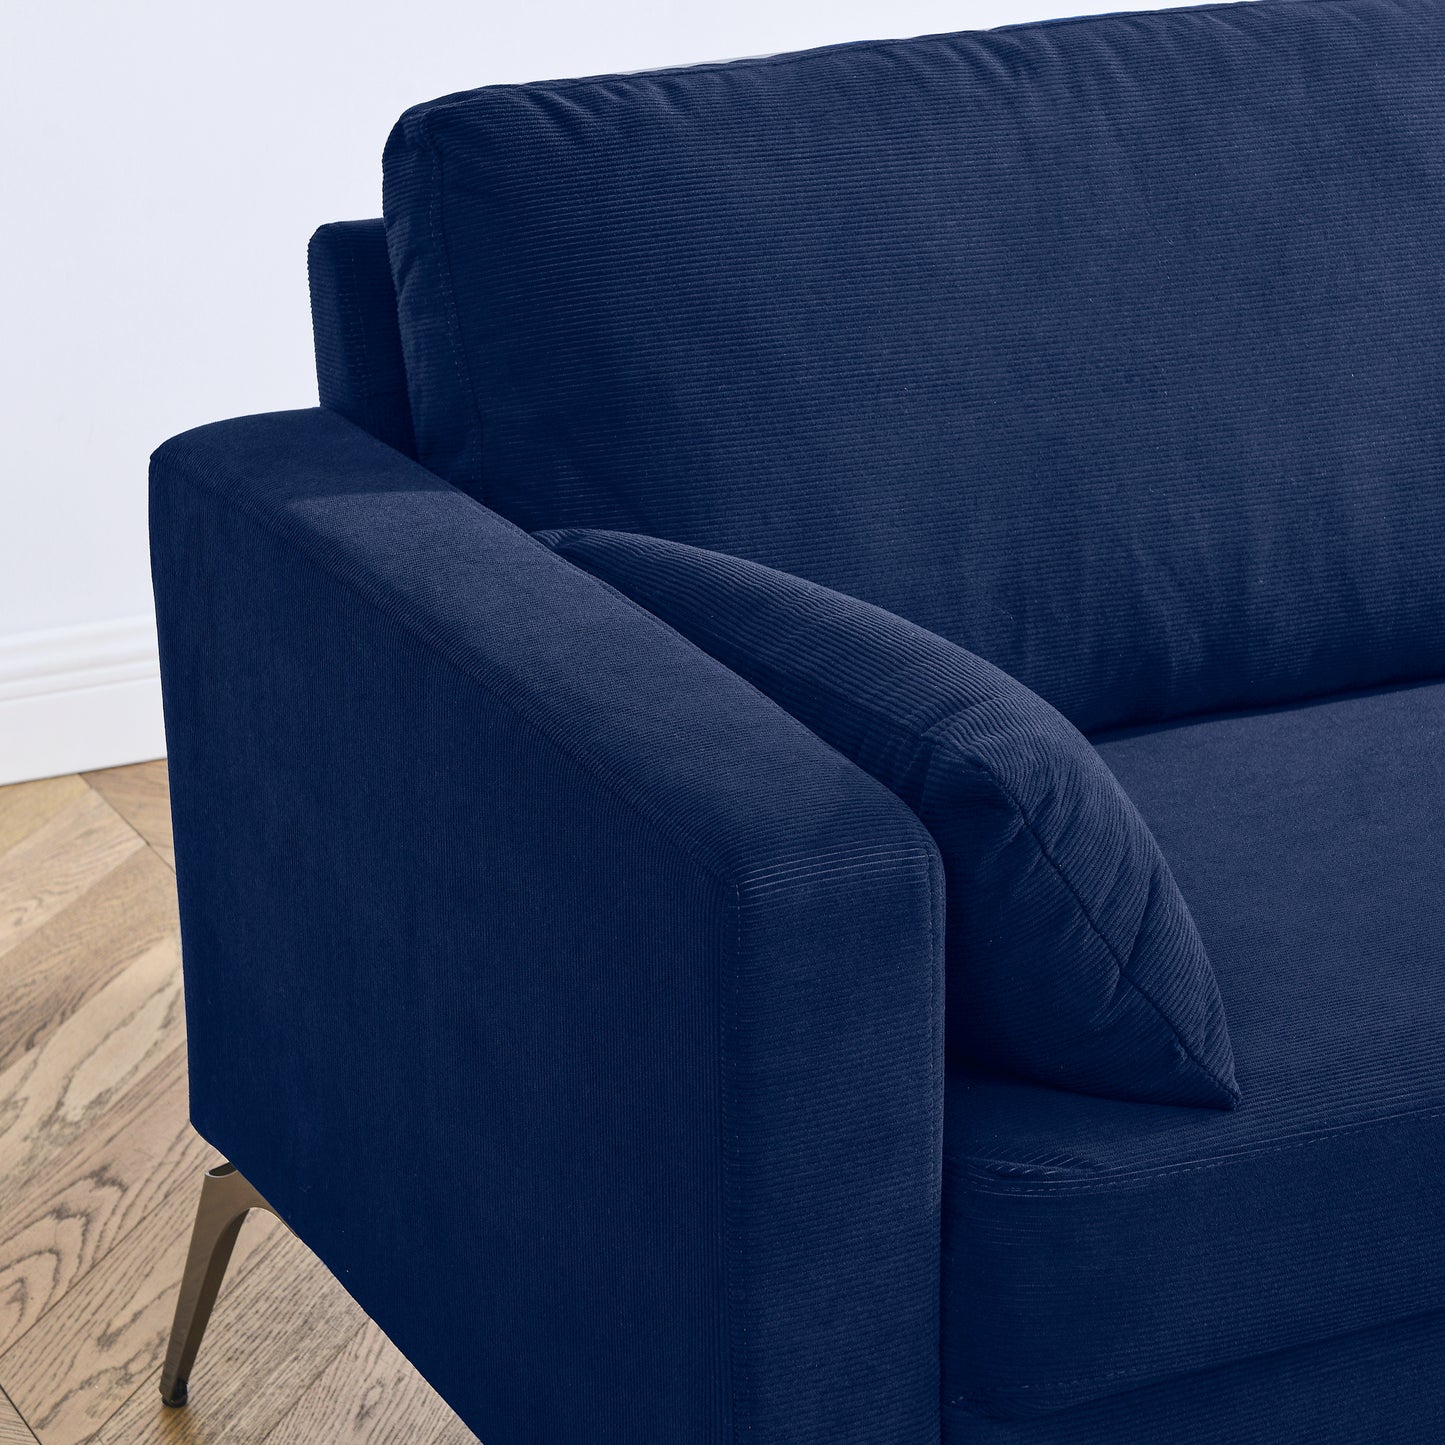 Corduroy 3-Seater Sofa with Square Arms, Two Accent Pillows - Navy